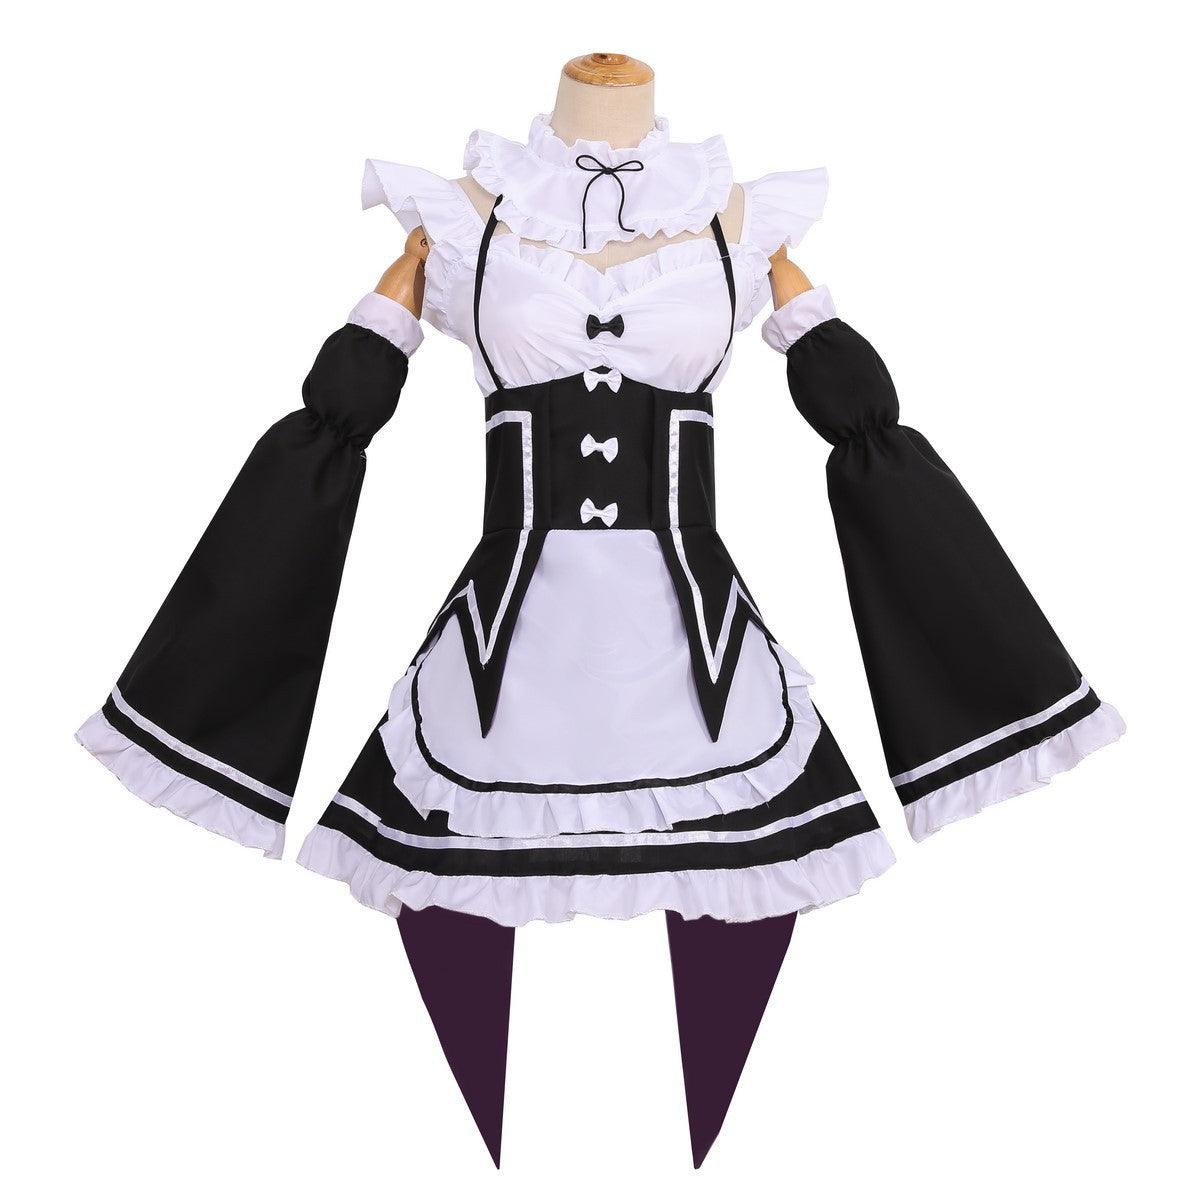 Starting Life in Another World Ram Rem Anime Maid Outfit Dress Japanese Cosplay Costume